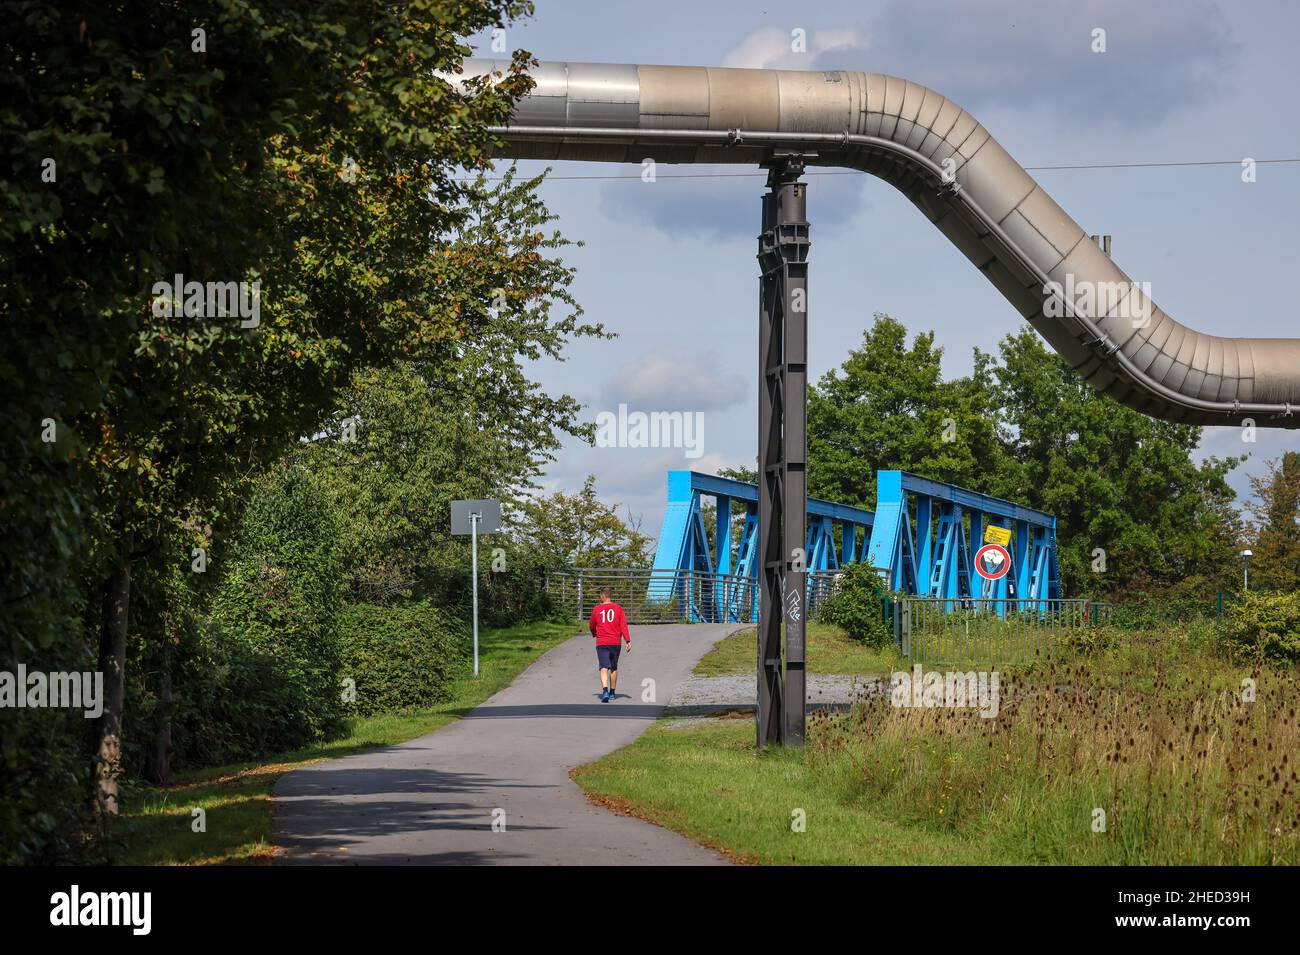 Essen, North Rhine-Westphalia, Germany - District heating pipelines along the Emscher. District heating is the term used to describe heat that is gene Stock Photo